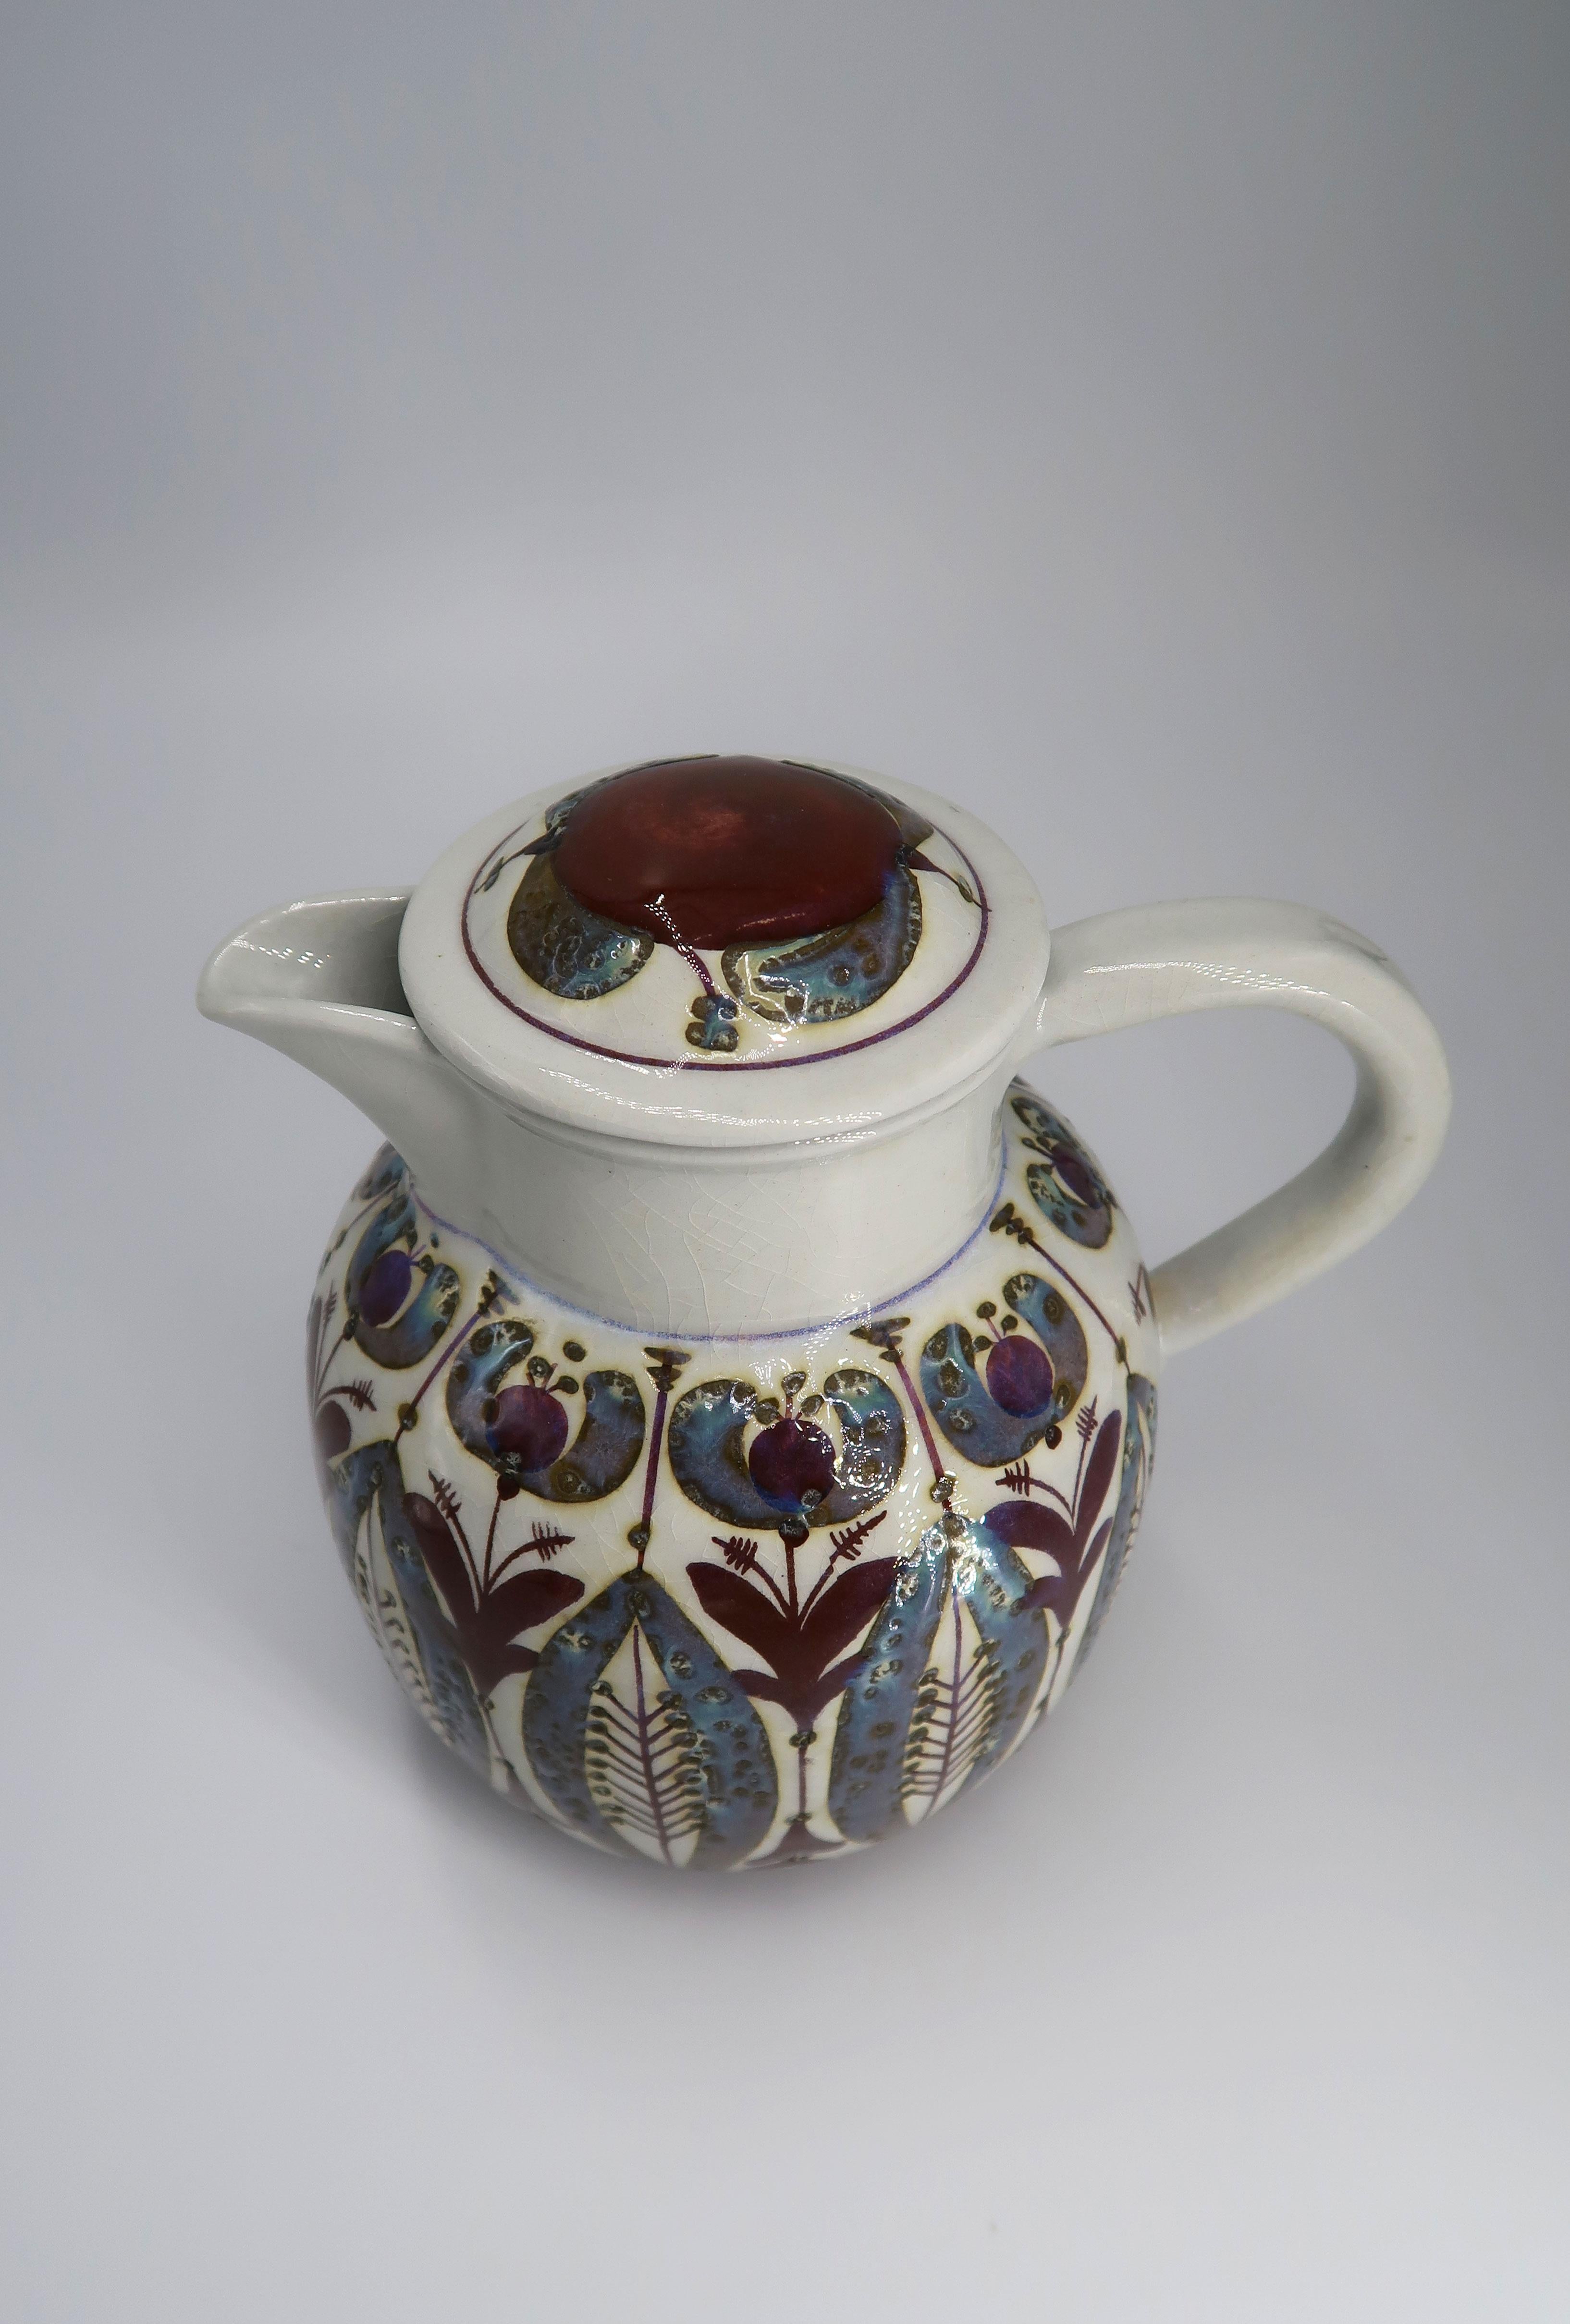 Beautiful Danish Mid-century Modern hand decorated faience pitcher by designer Berte Jessen for Royal Copenhagen. Hand painted organic decorations in plum, purple, blue and green. Manufactured by Royal Copenhagen in the early 1960s. Model 509/3143.